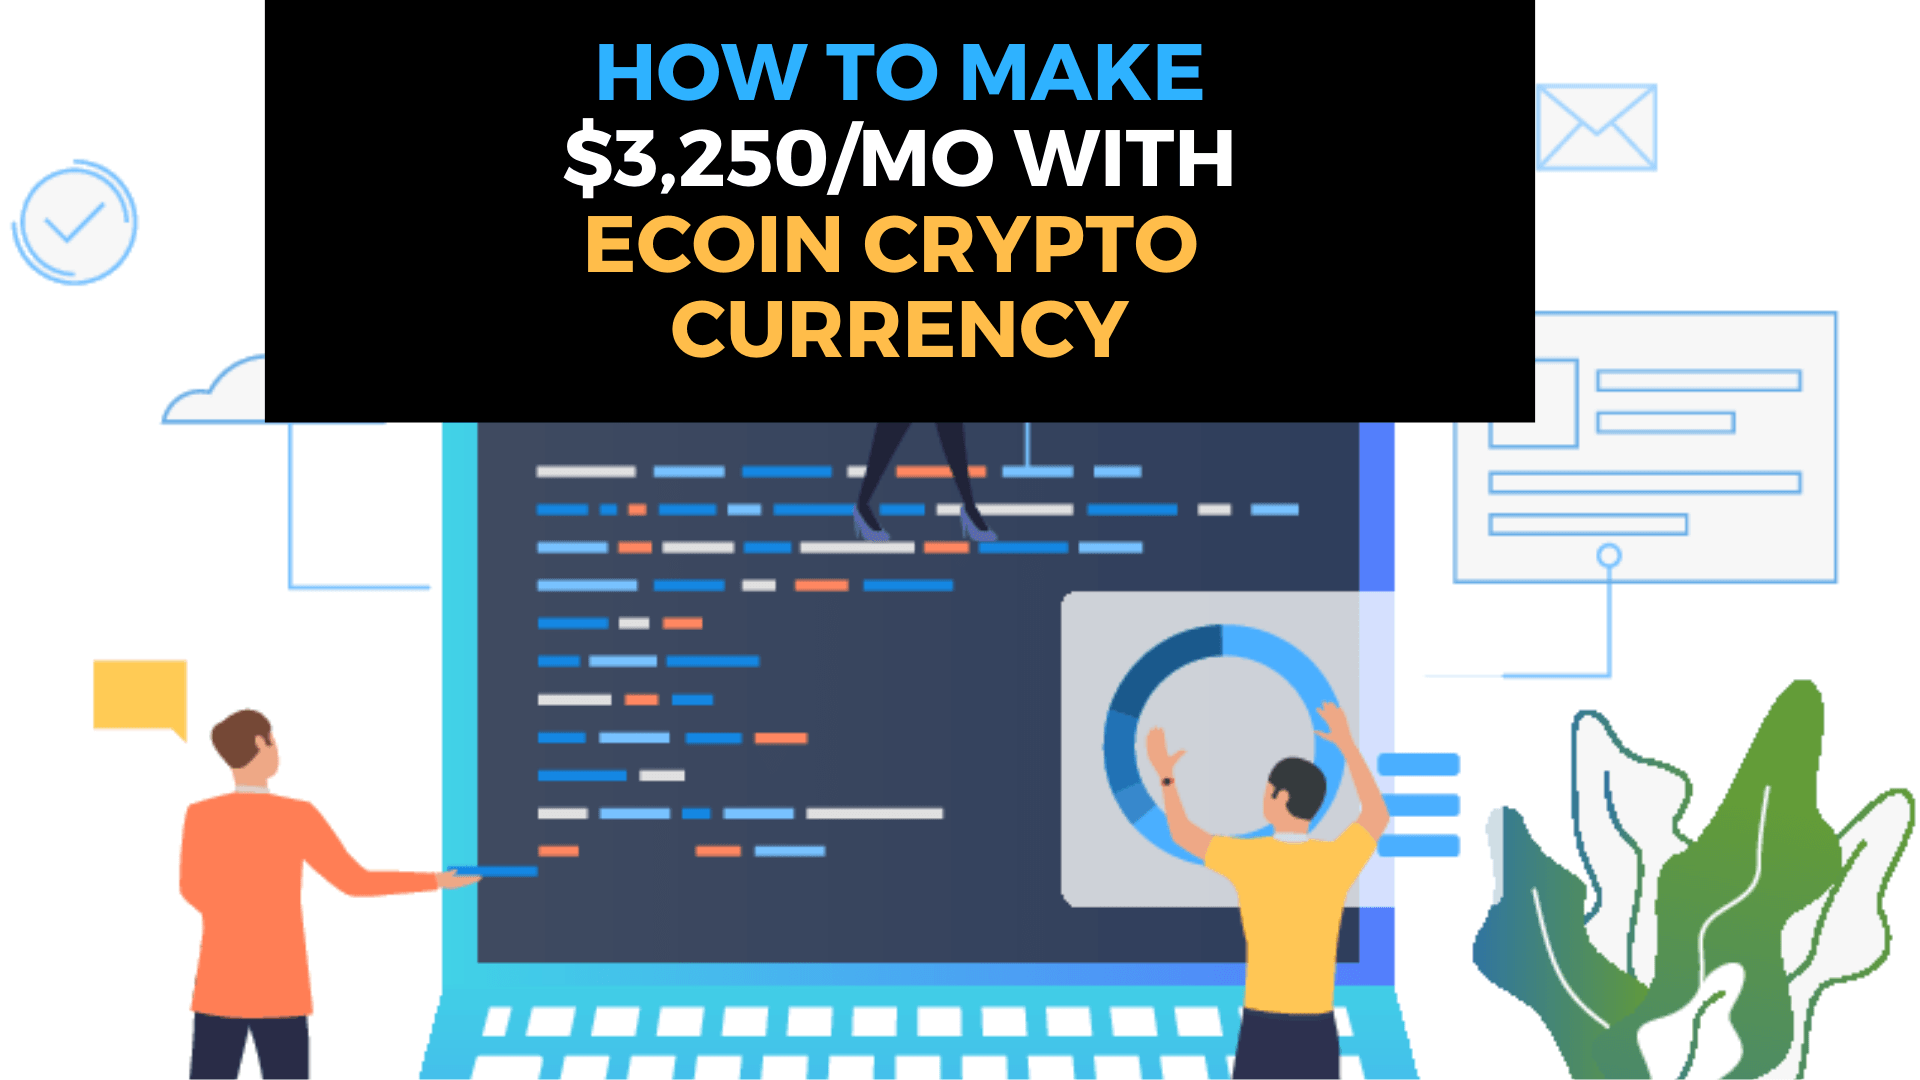 Make $3,250/mo with Ecoin Currency